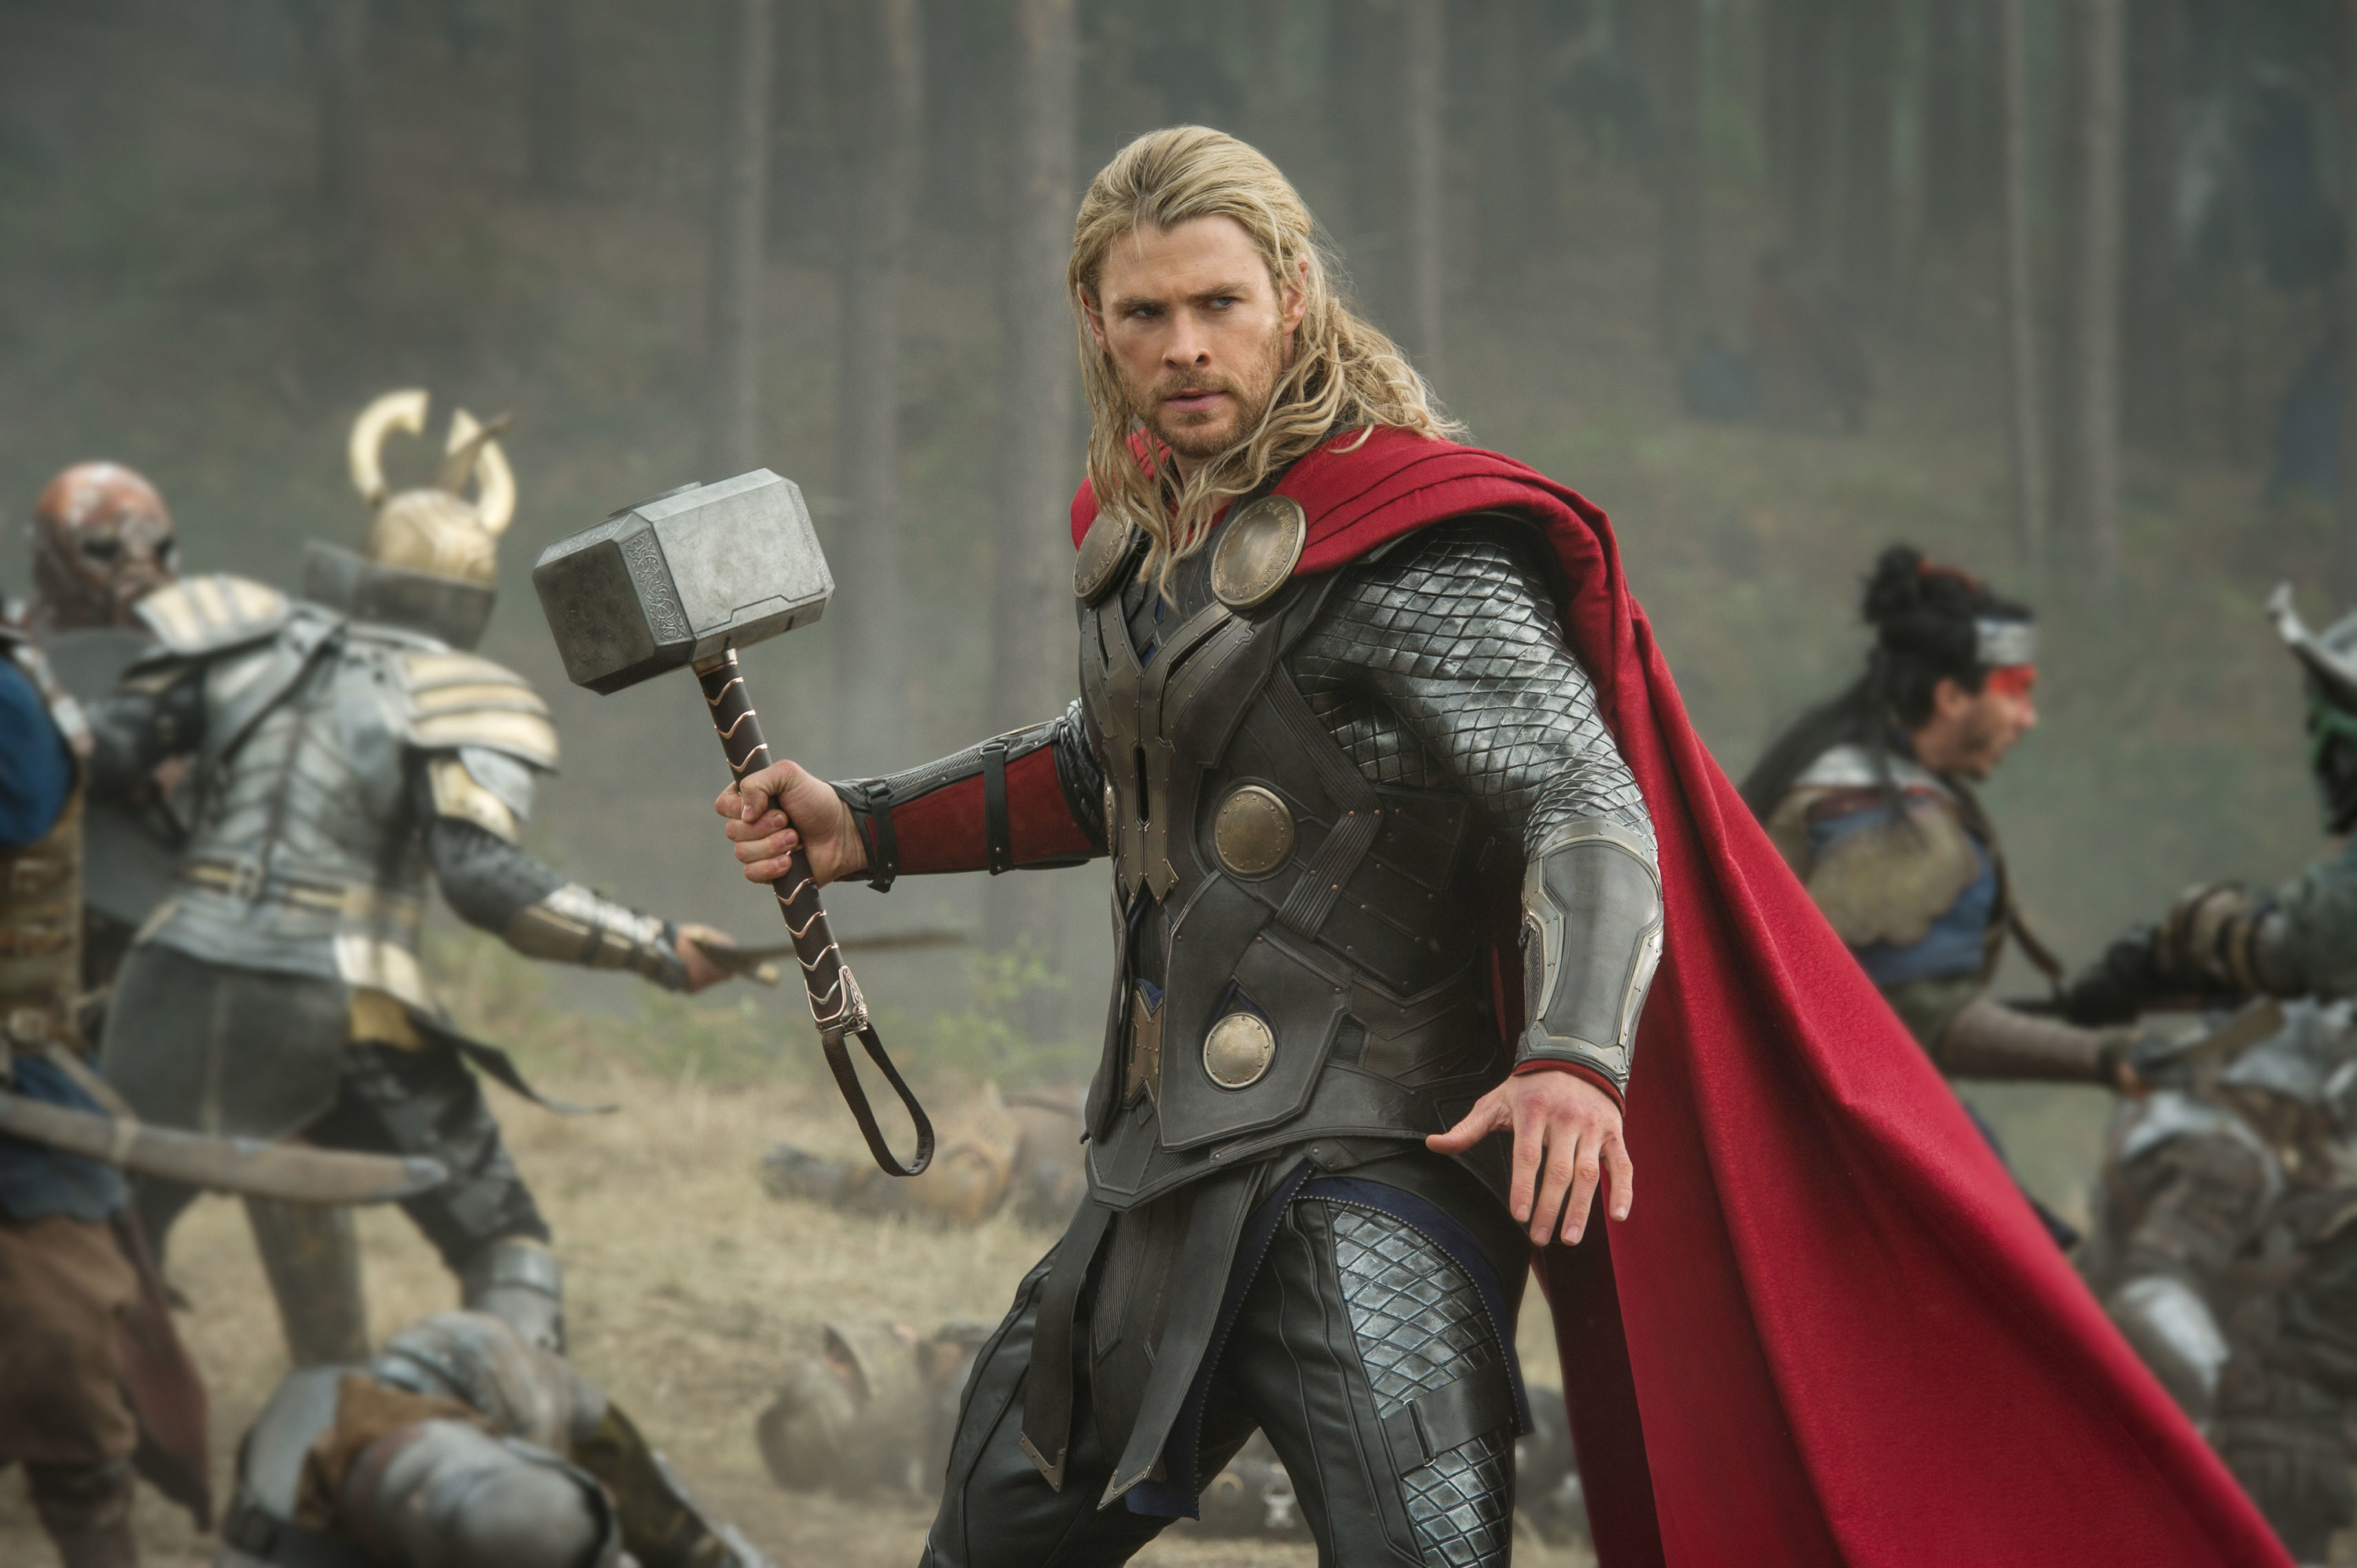 Thor wearing his classic outfit